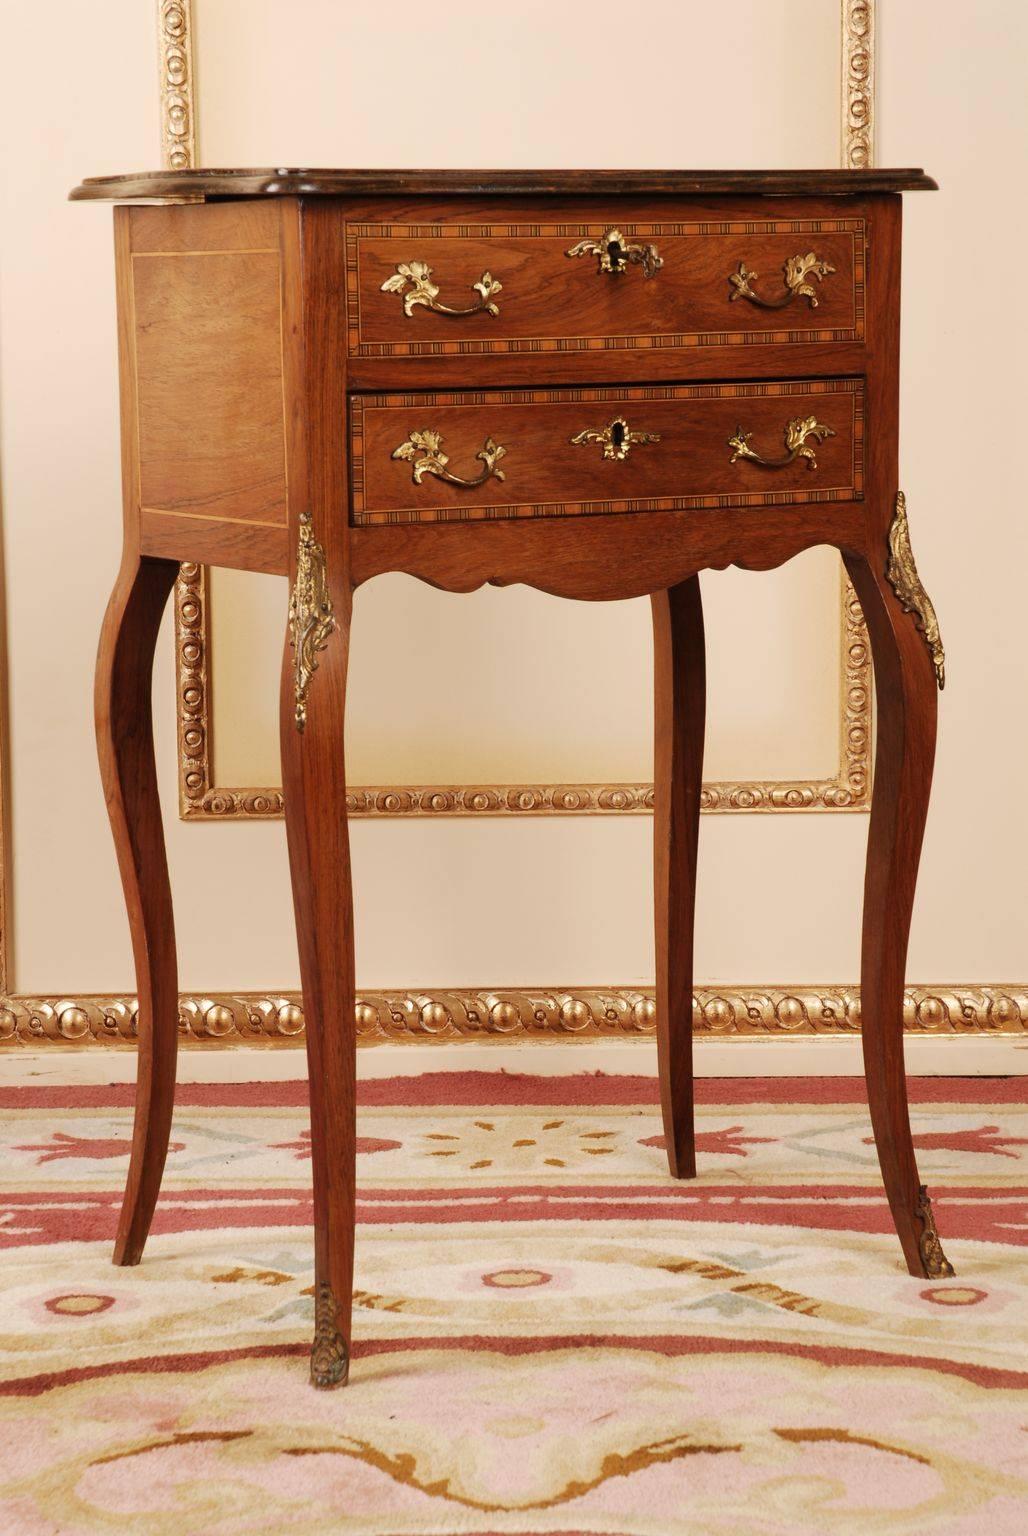 Elegant side table in the Louis Quinze style.
Rosewood on pine. The whole corpus is inlaid. Slightly protruding top plate on two-waisted cambered frame on curved legs. Rich bronze fittings.

(G-41).